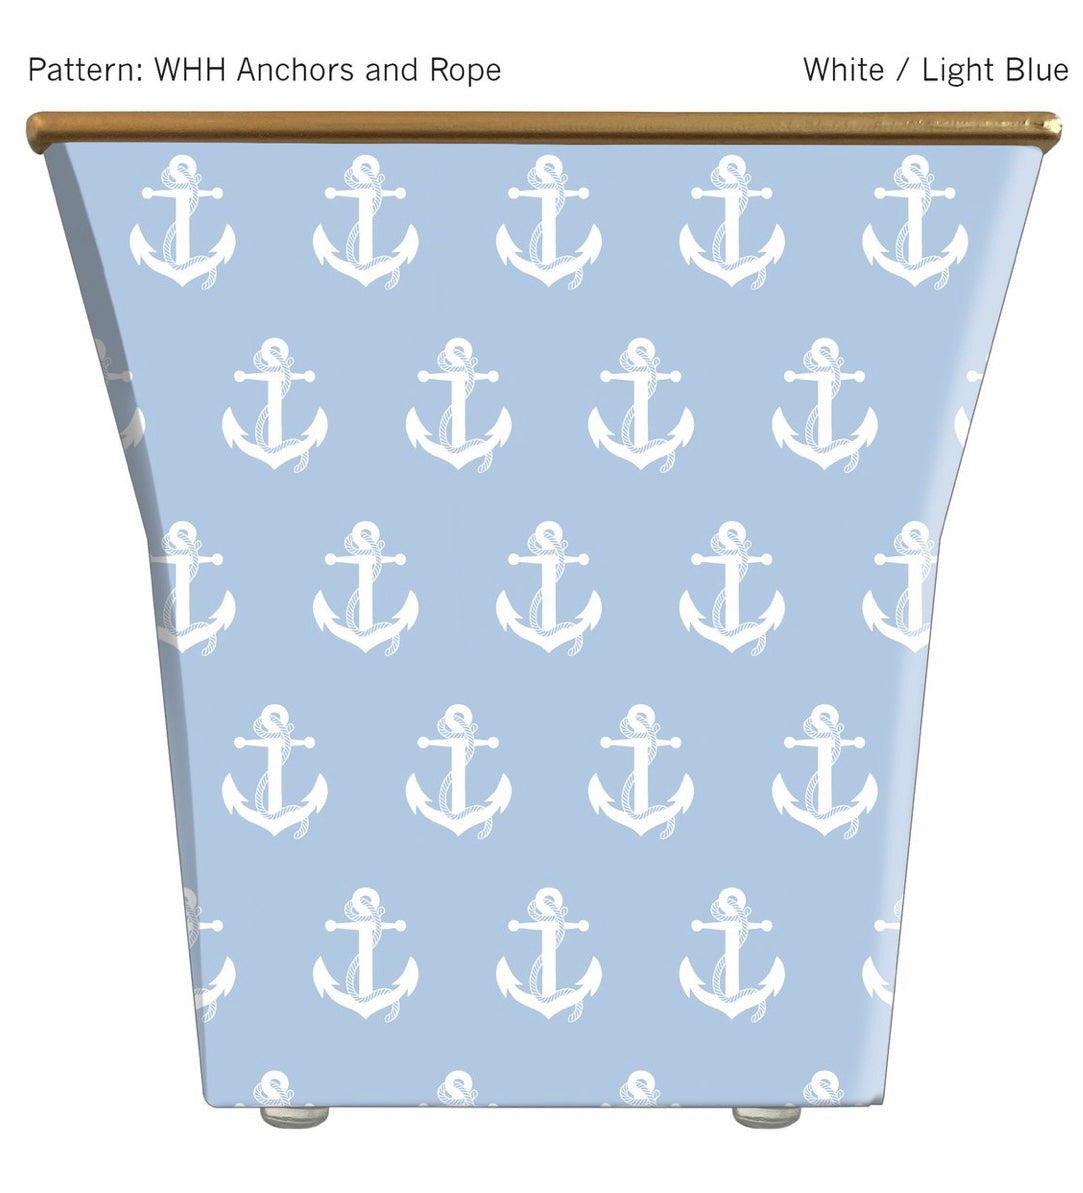 WHITE & LIGHT BLUE ANCHORS  & ROPES CACHE POT CANDLE